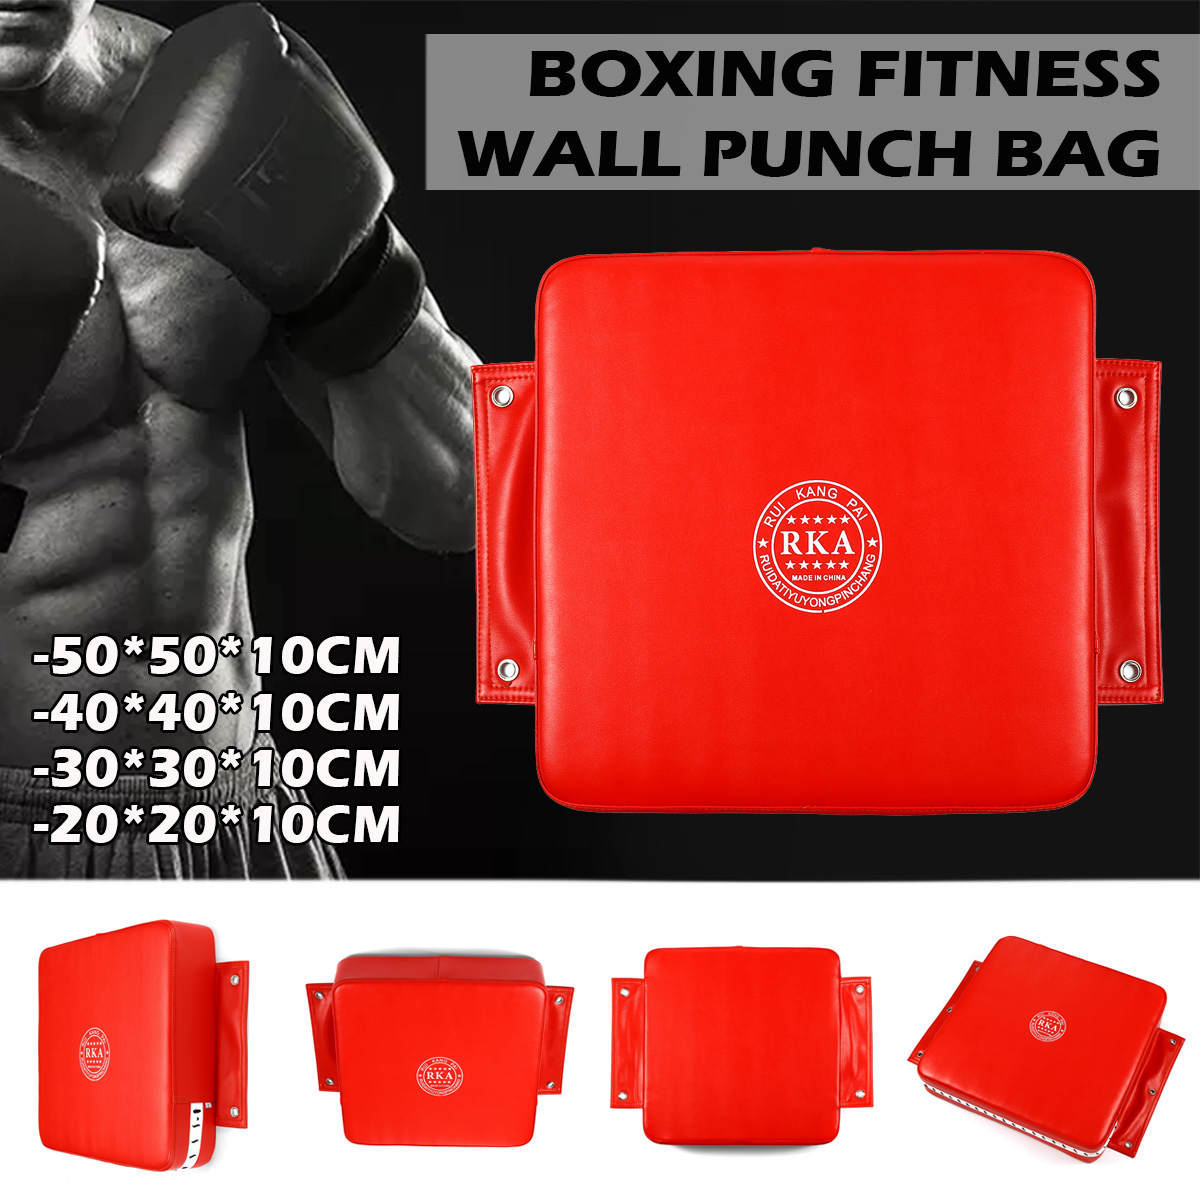 Wocume Boxing Fighter Fitness Wall Punch Bag Training Square Focus Target Soft Pad